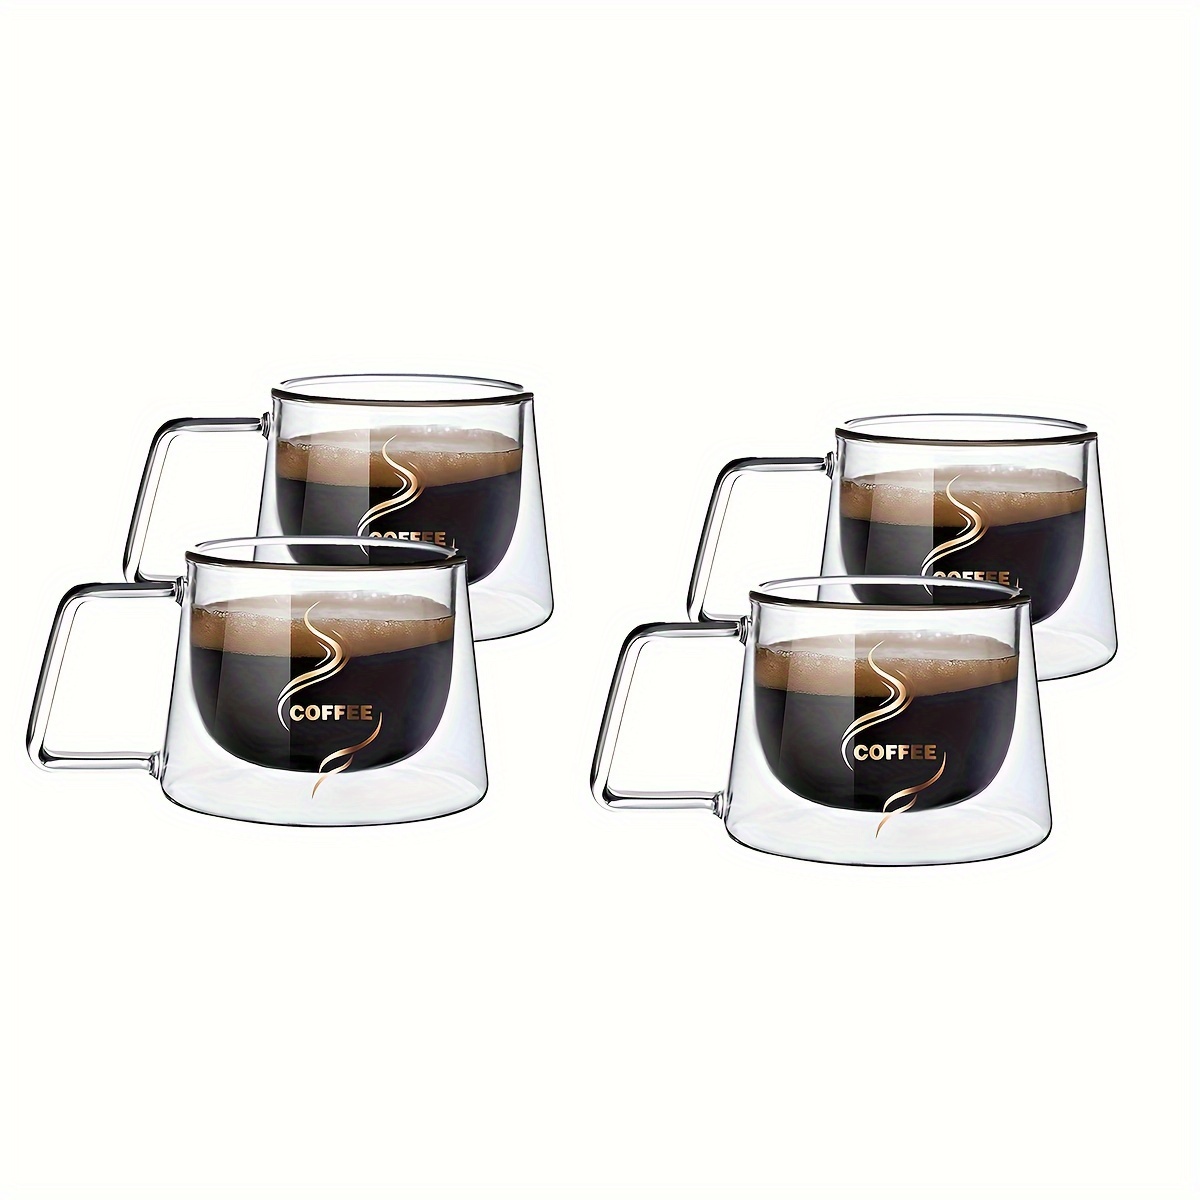 

4pcs, Glass Coffee Mugs, 200ml Double-walled Espresso Coffee Cups, Heat Insulated Water Cups, Summer Winter Drinkware, Birthday Gifts, Dishwasher Safe